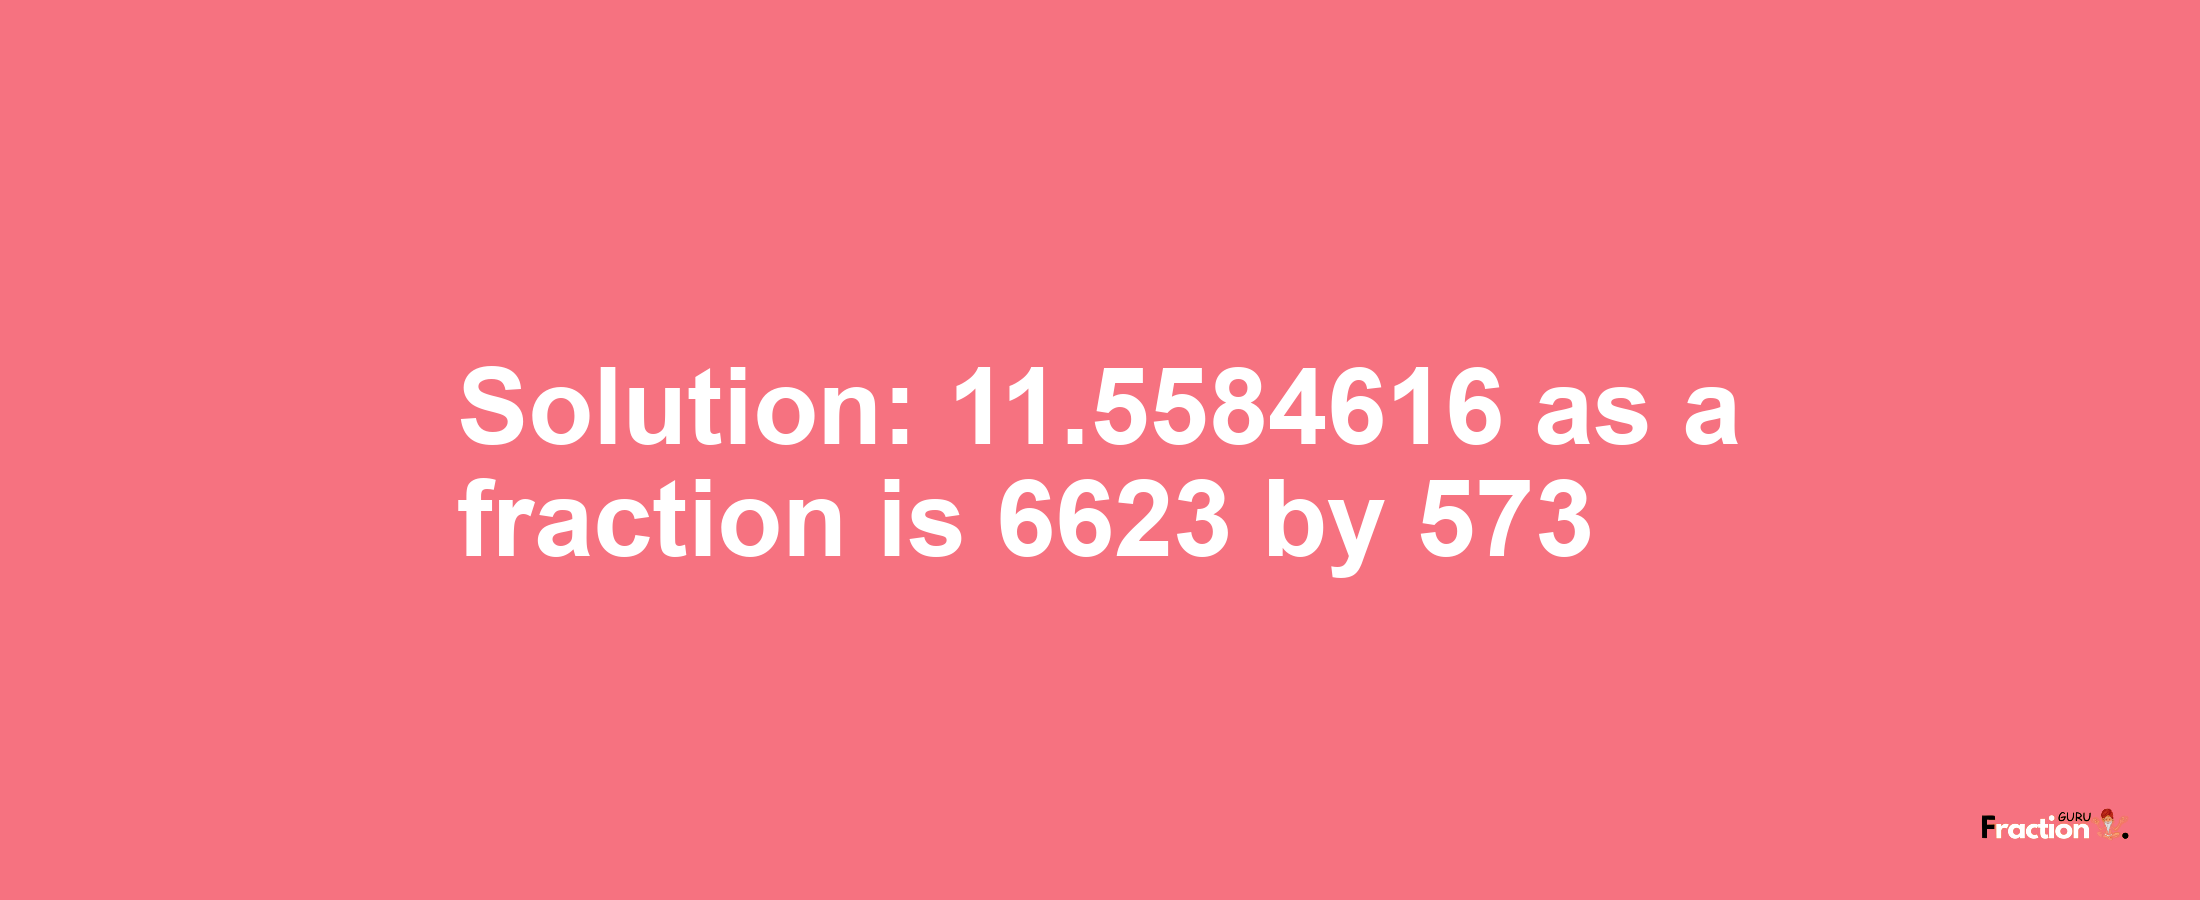 Solution:11.5584616 as a fraction is 6623/573